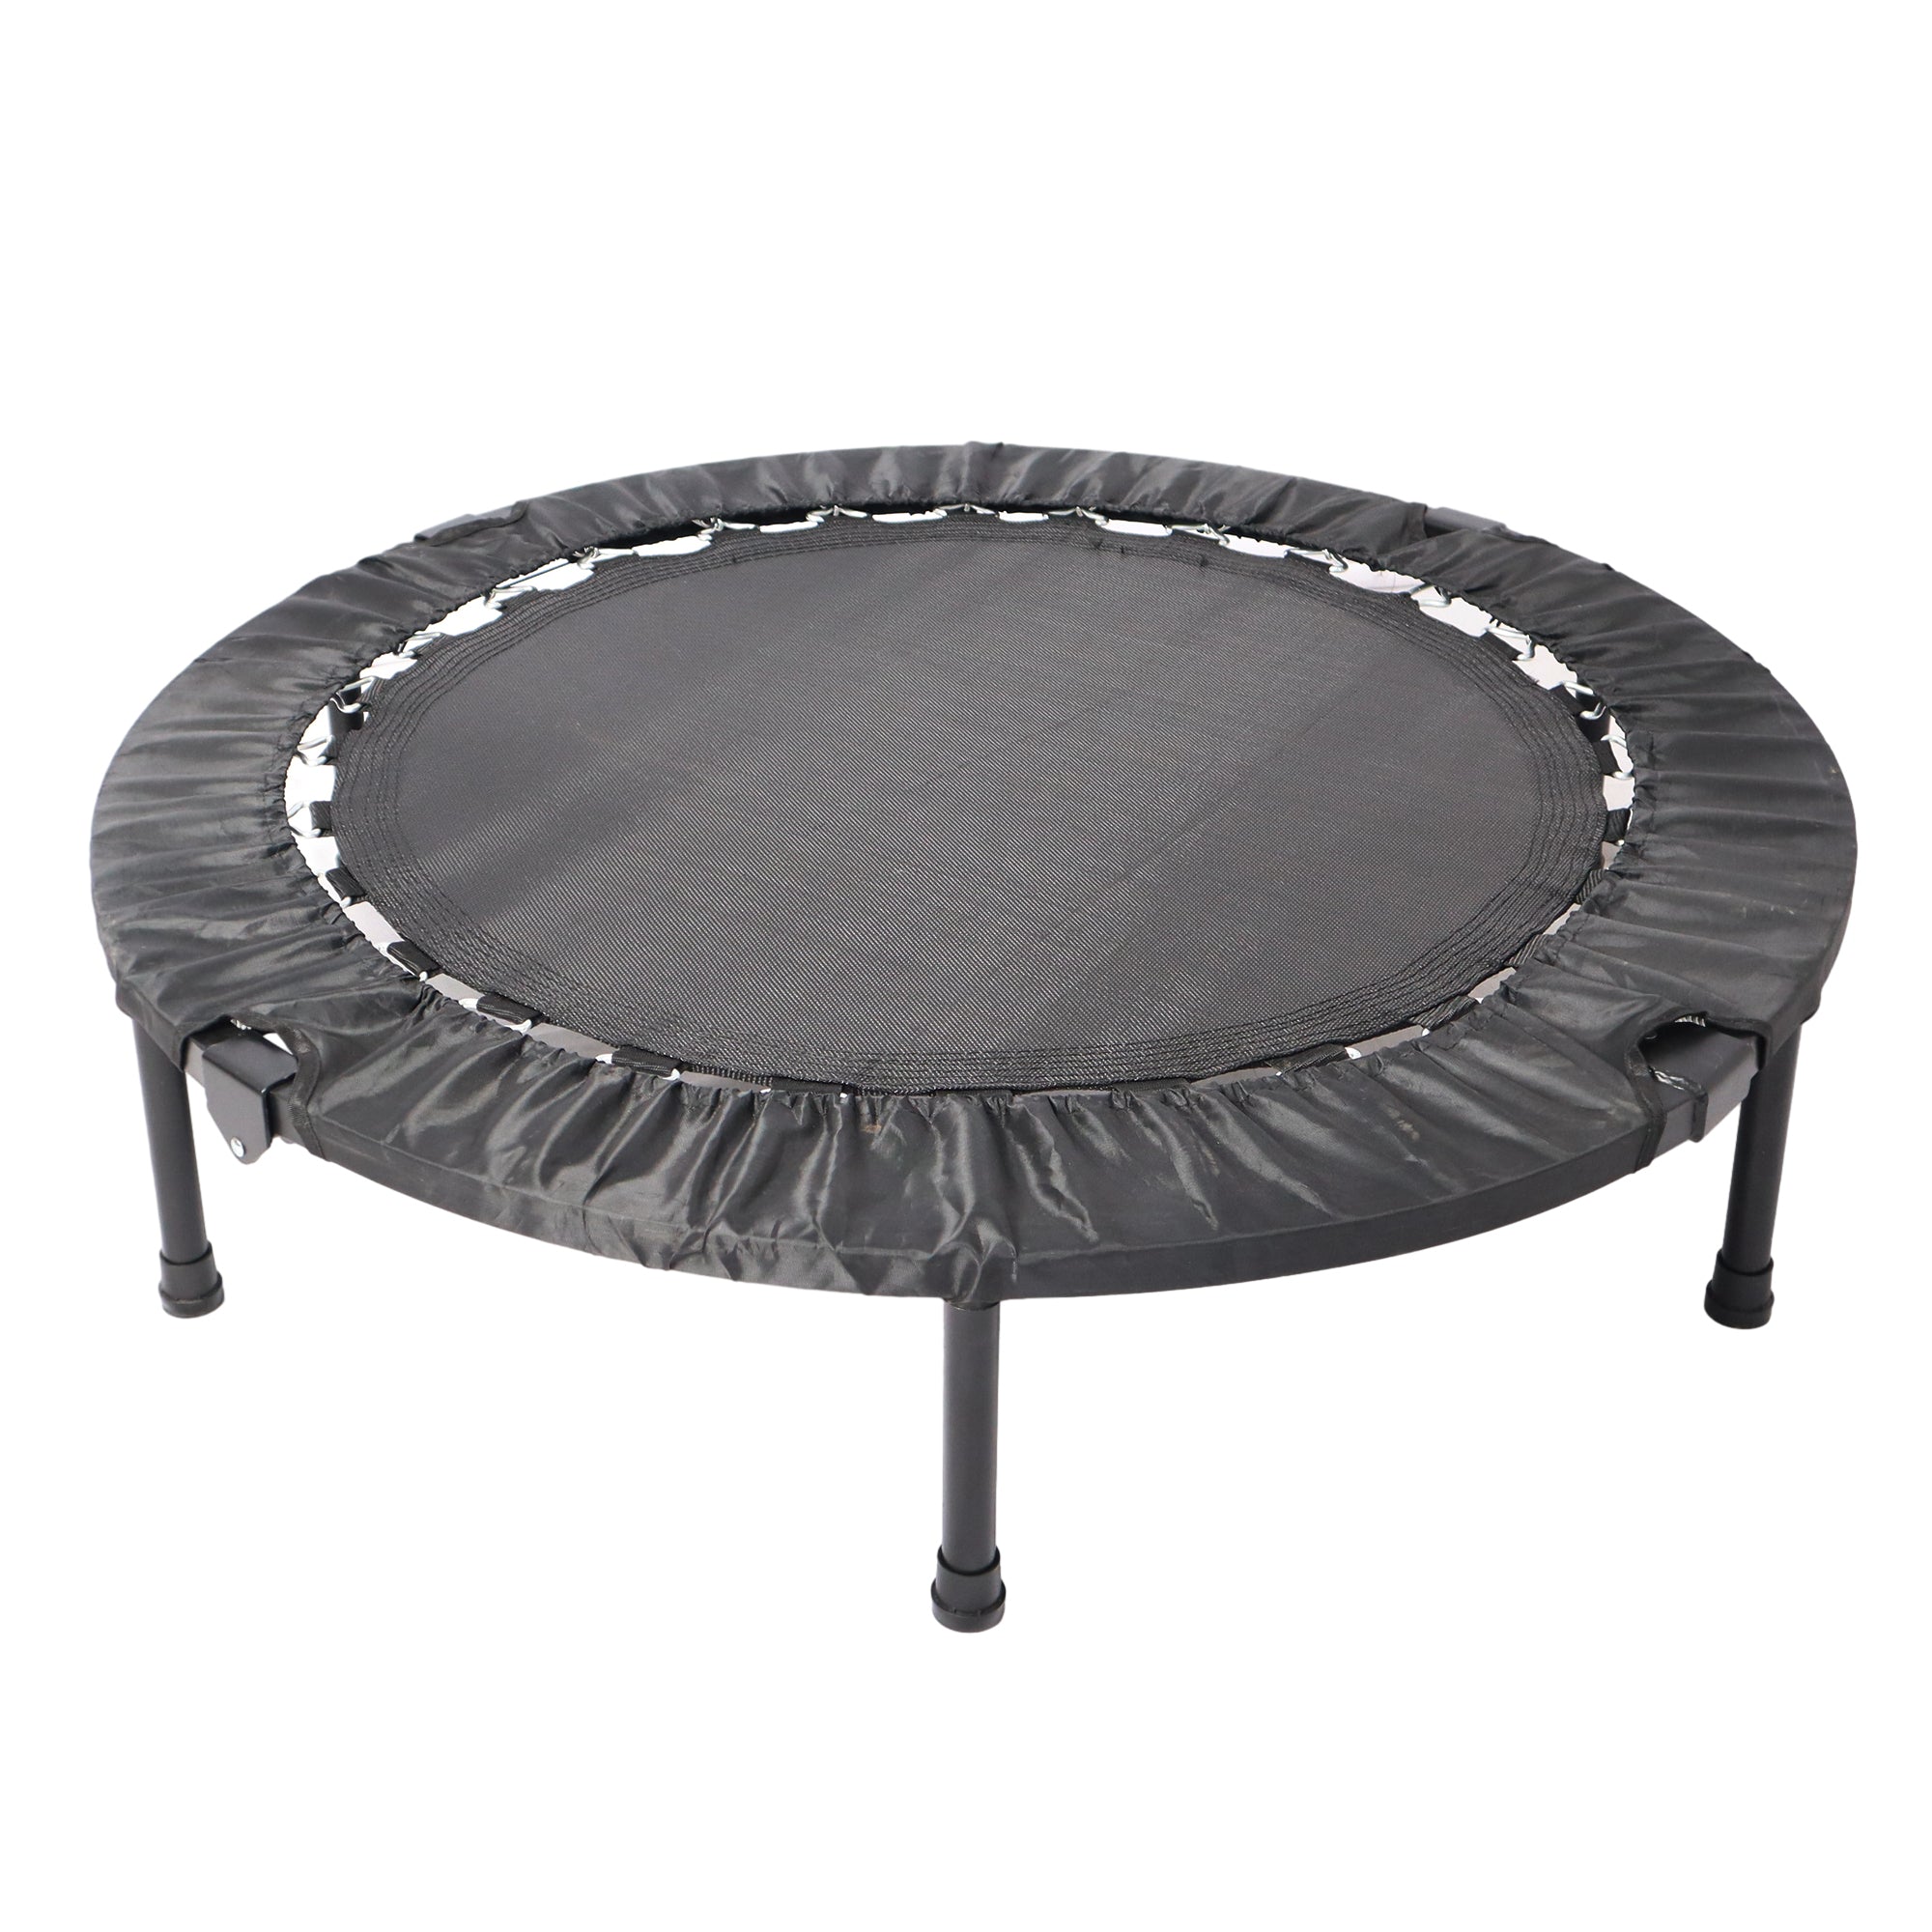 40-Inch-Mini-Exercise-Trampoline-for-Adults-or-Kids-Exercise-&-Fitness